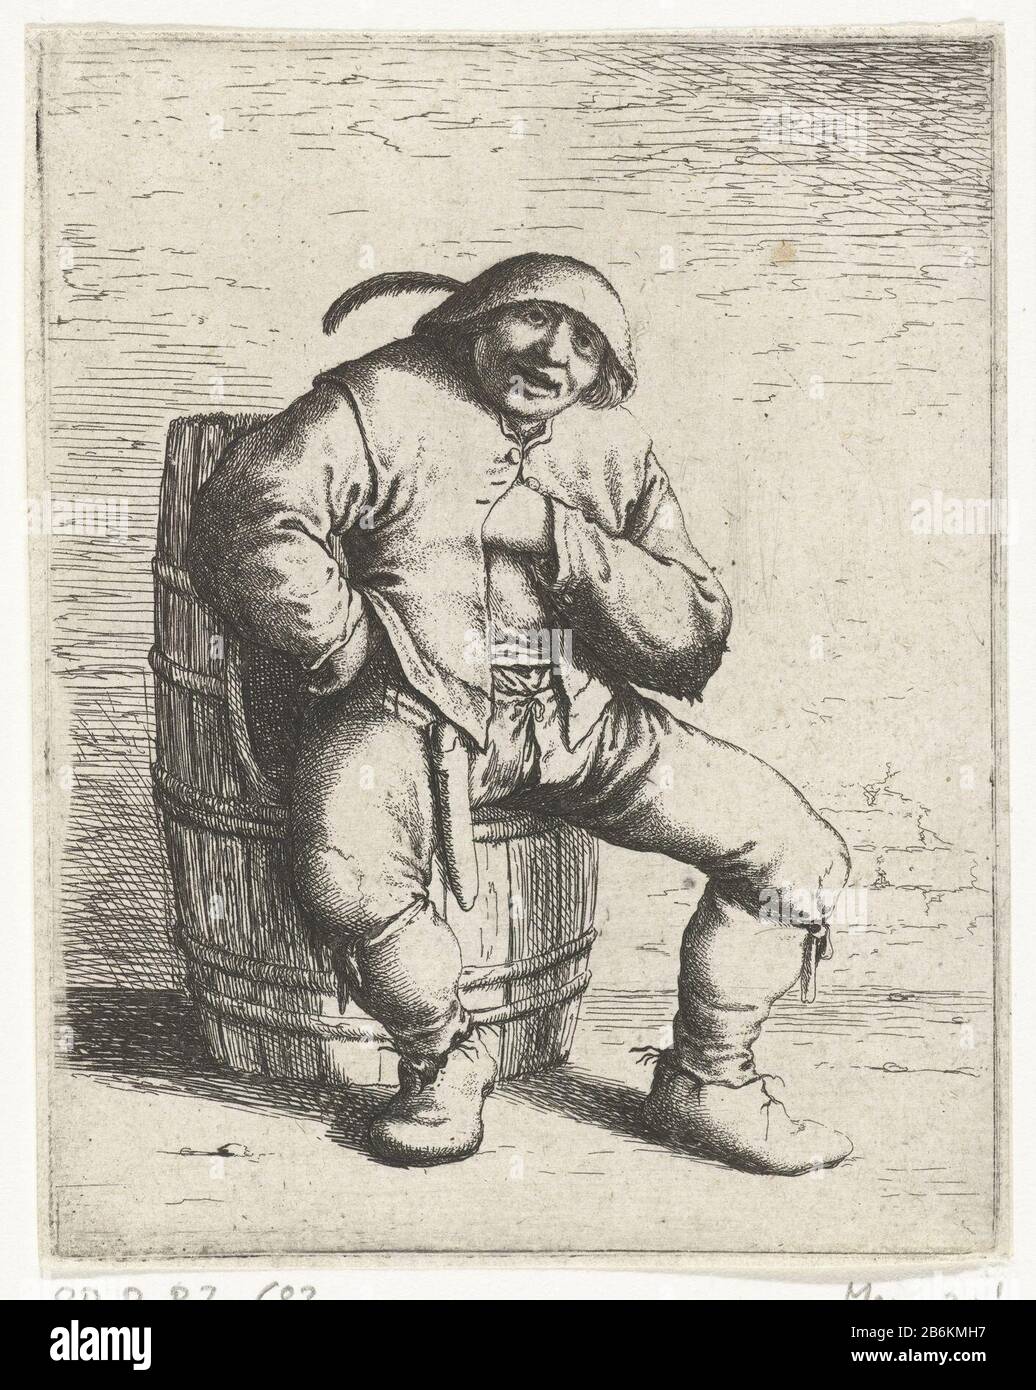 A man sitting on a ton A man sitting a ton, hand on her hip, the other under his jas. Manufacturer : printmaker Willem Bass to design: Adriaen Brouwer Place manufacture: Amsterdam Date: 1633 - 1672 Physical features: etching material: paper Technique: etching dimensions: plate edge: h 116 mm × W 92 mm Subject: morphology of human expression (+ sitting) Stock Photo